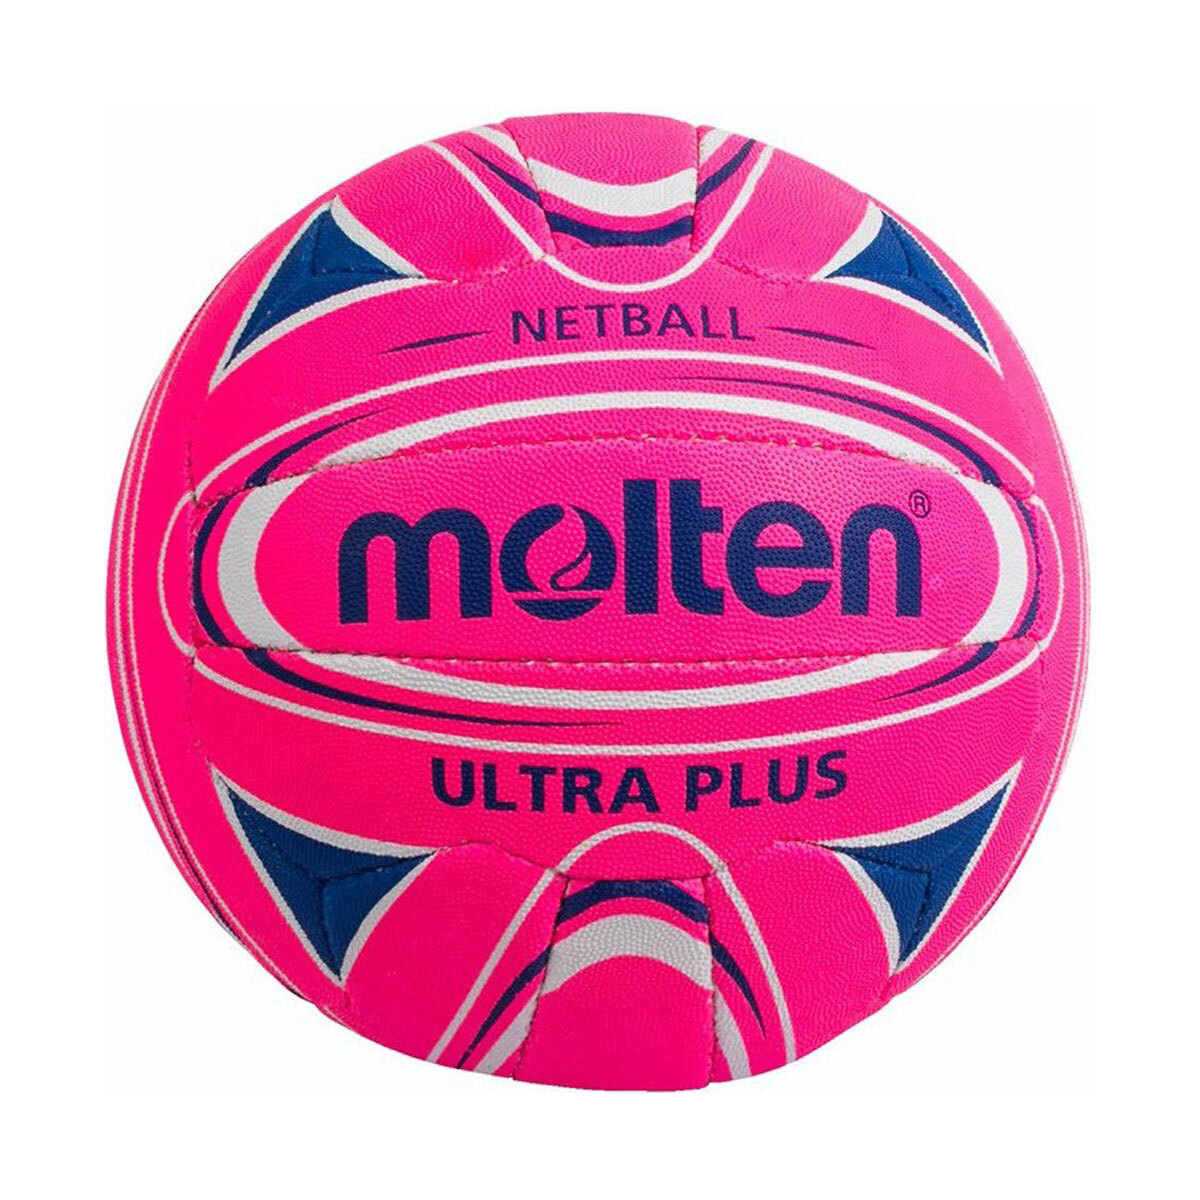 Lead Image for Molten Fast 5 International Standard Netball in Size 5